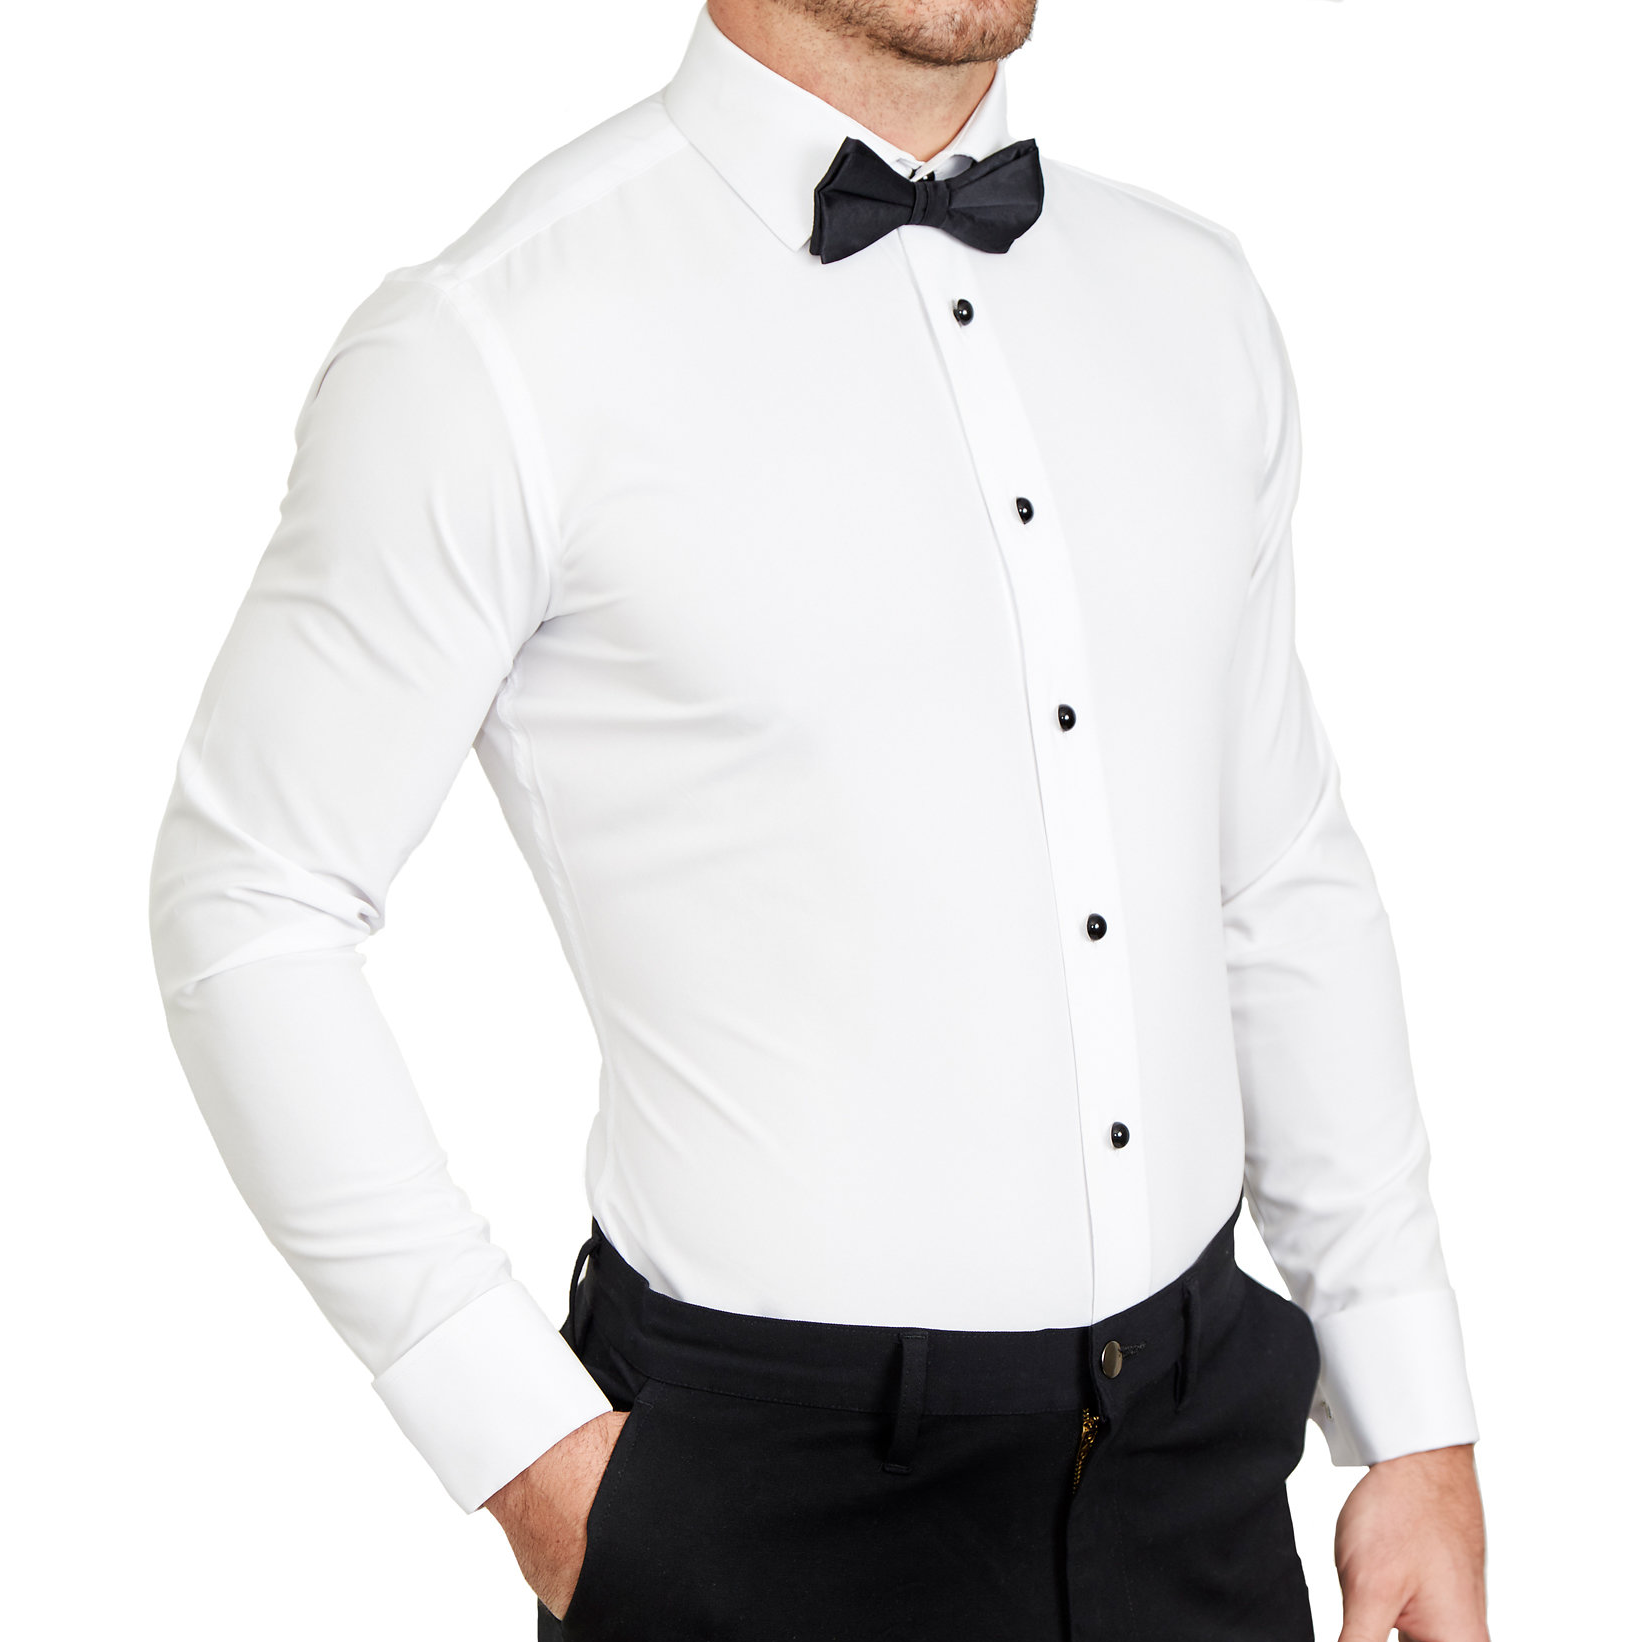 The Solid White Tuxedo Shirt - State and Liberty Clothing Company